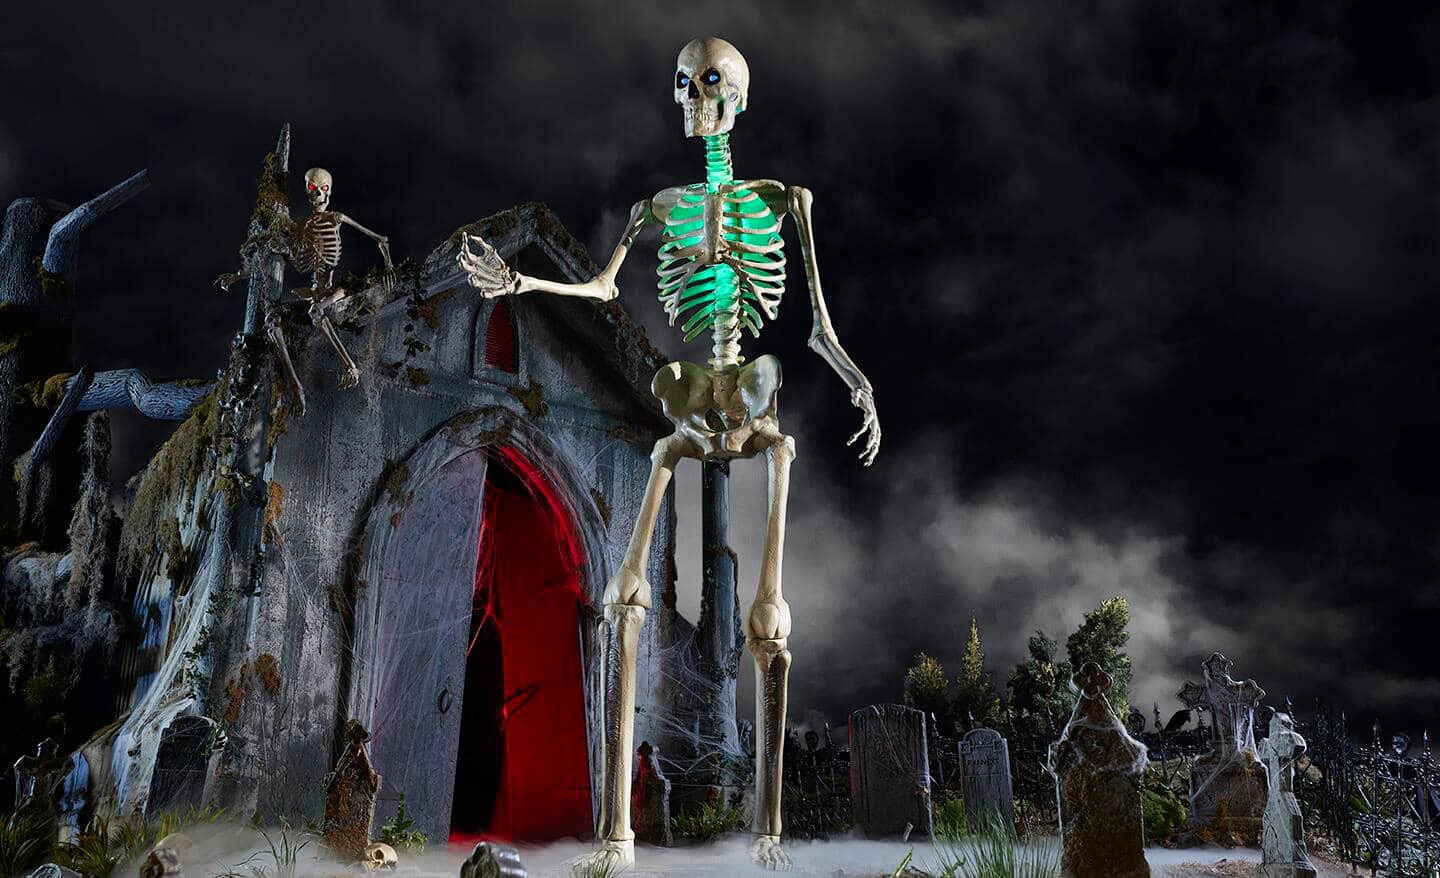 A 12-foot-tall skeleton glows in a dark yard decorated for Halloween.